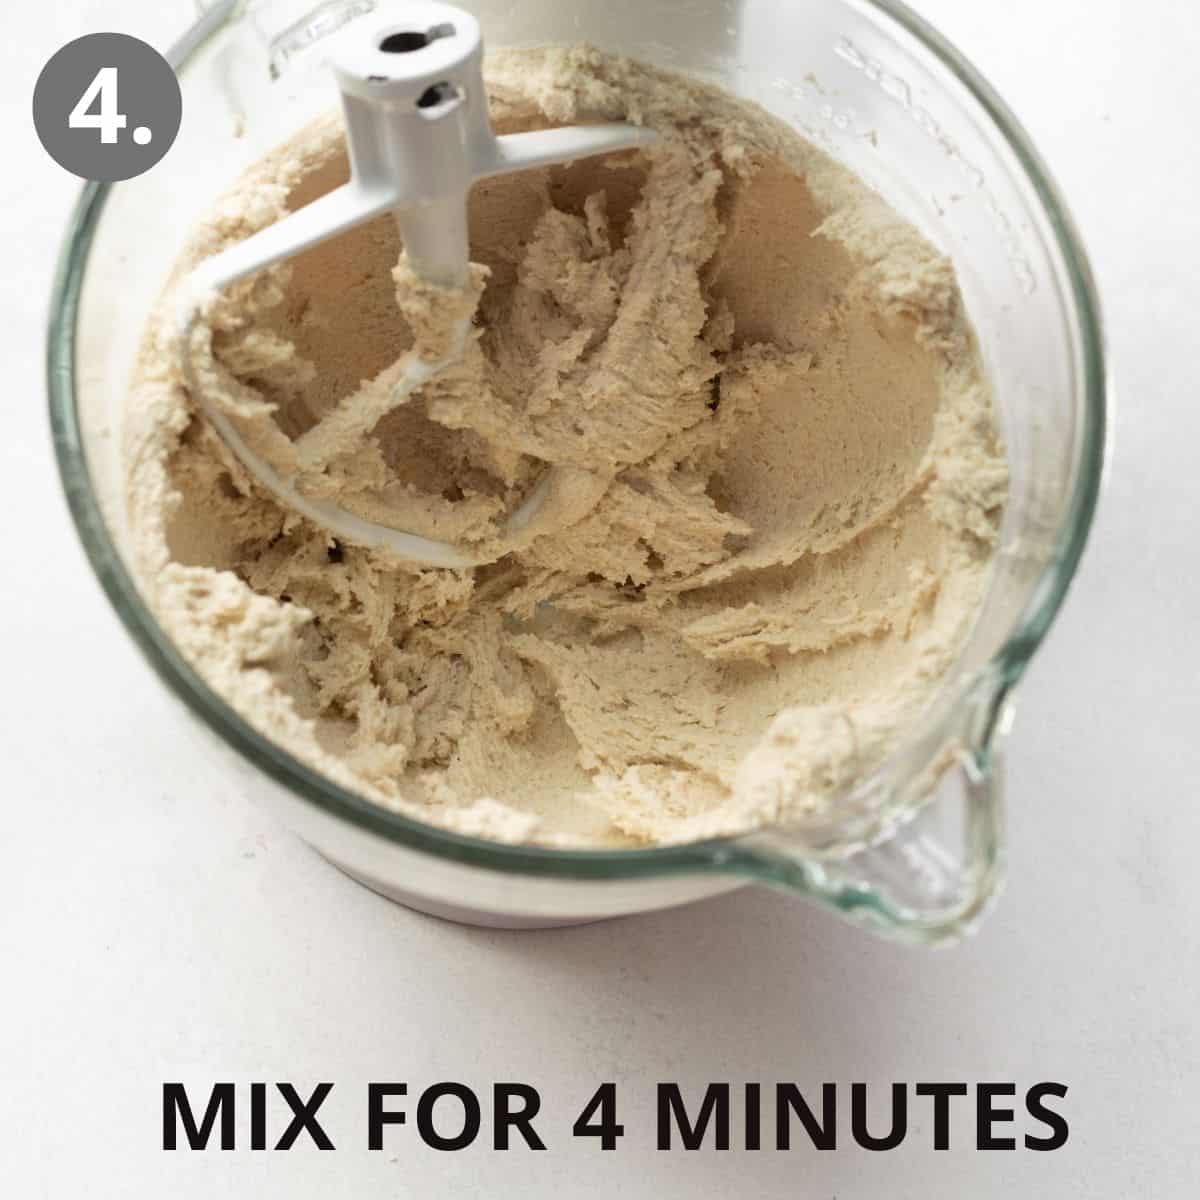 A standing mixer with the wet and dry ingredients being mixed together